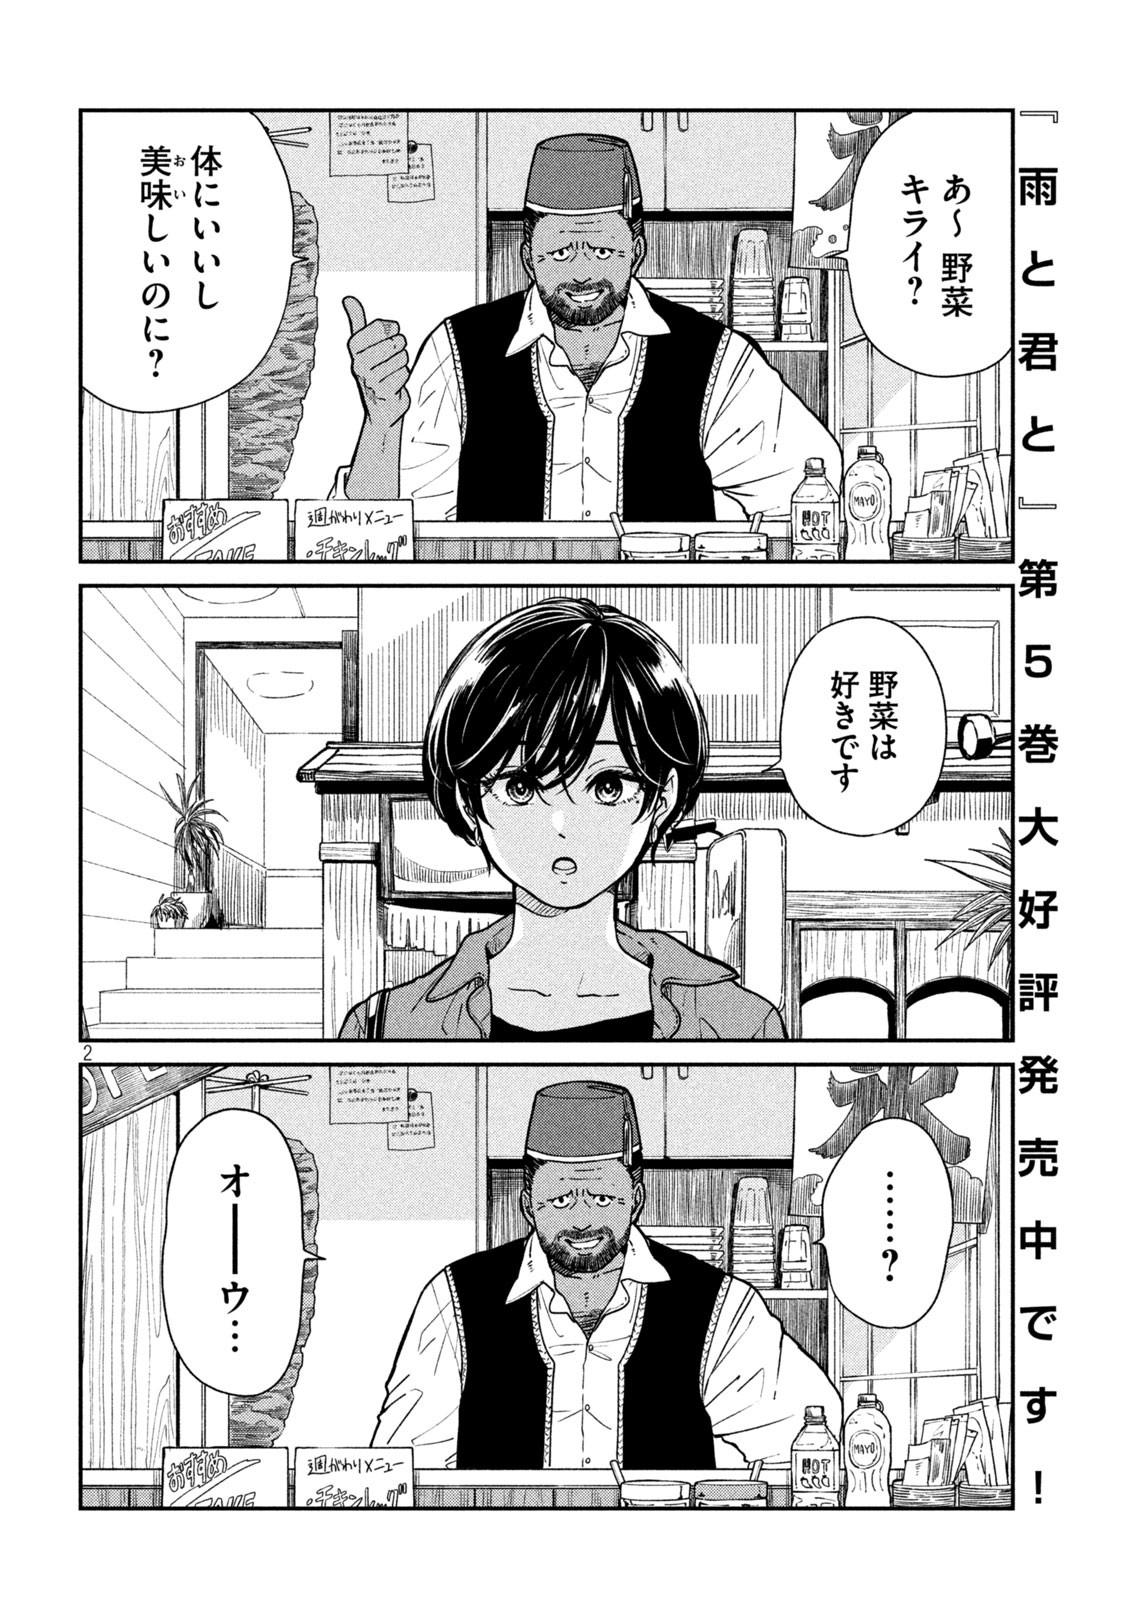 Ame to Kimi to - Chapter 96 - Page 2